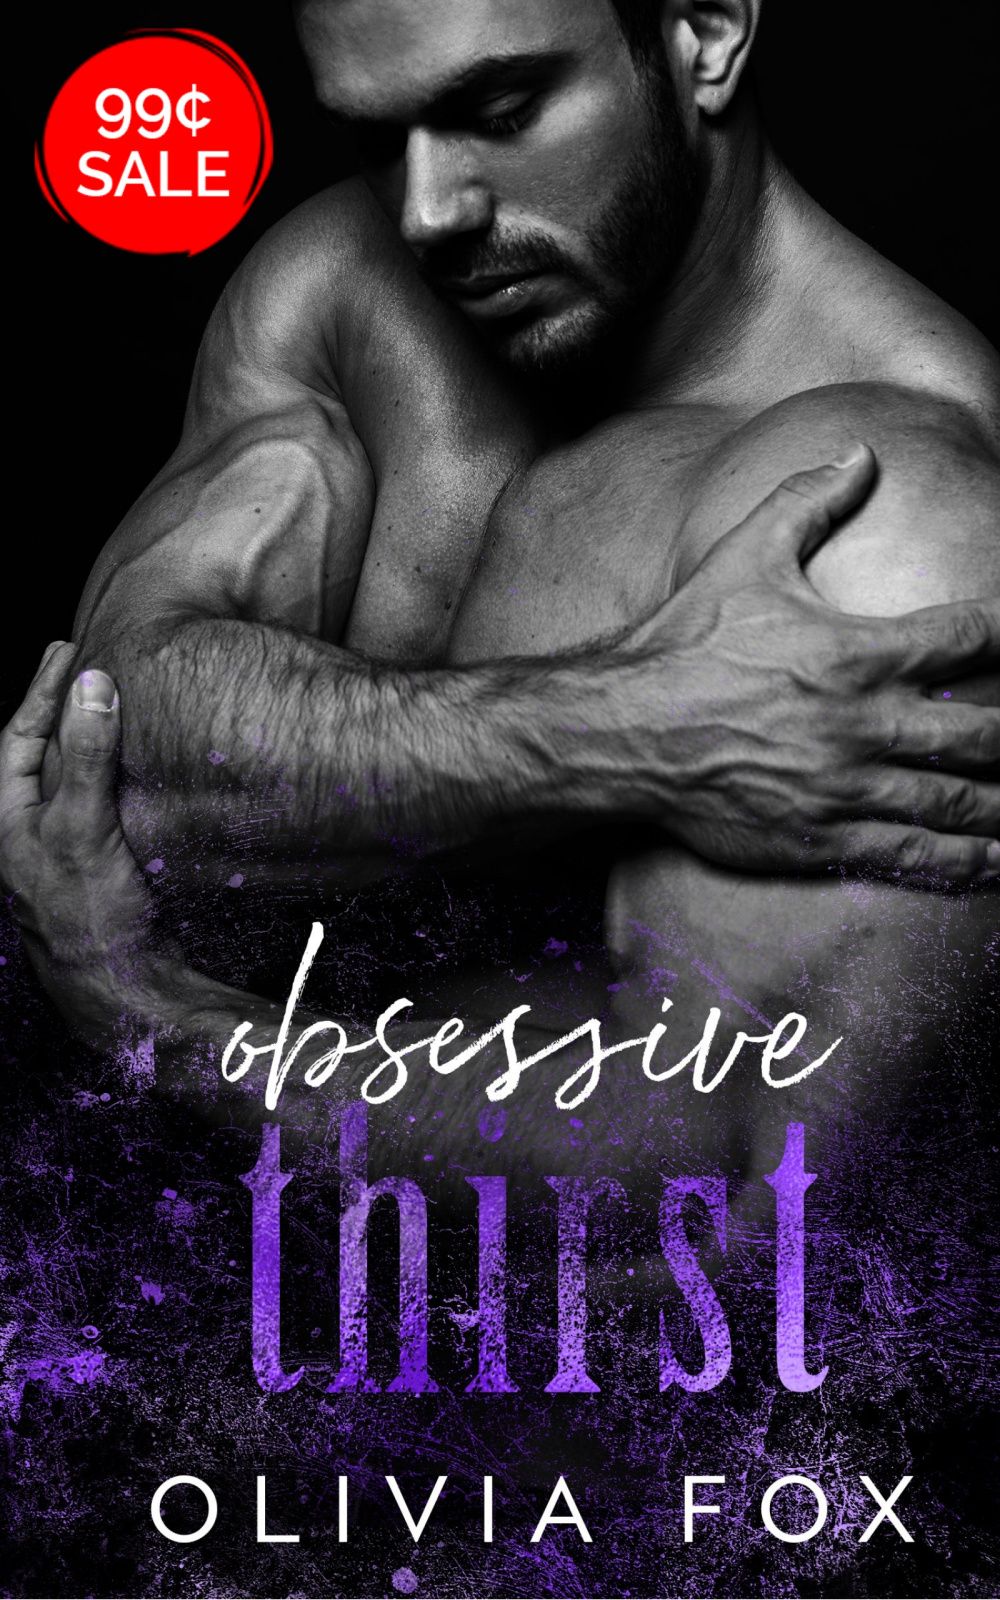 Obsessed Daddy For 99 Pennies!